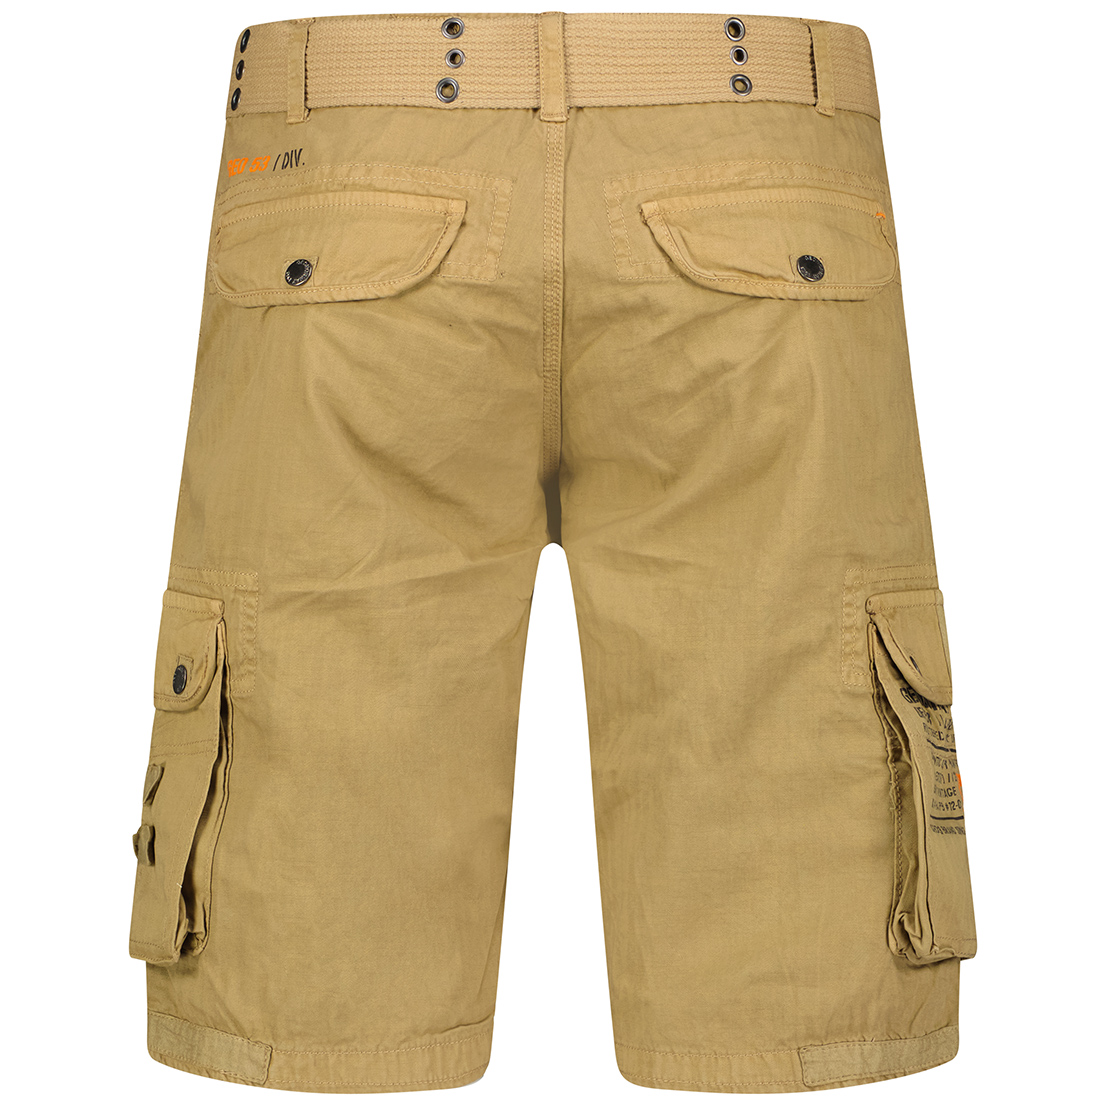 Cotton Shorts with Half Zip and Multiple Pockets